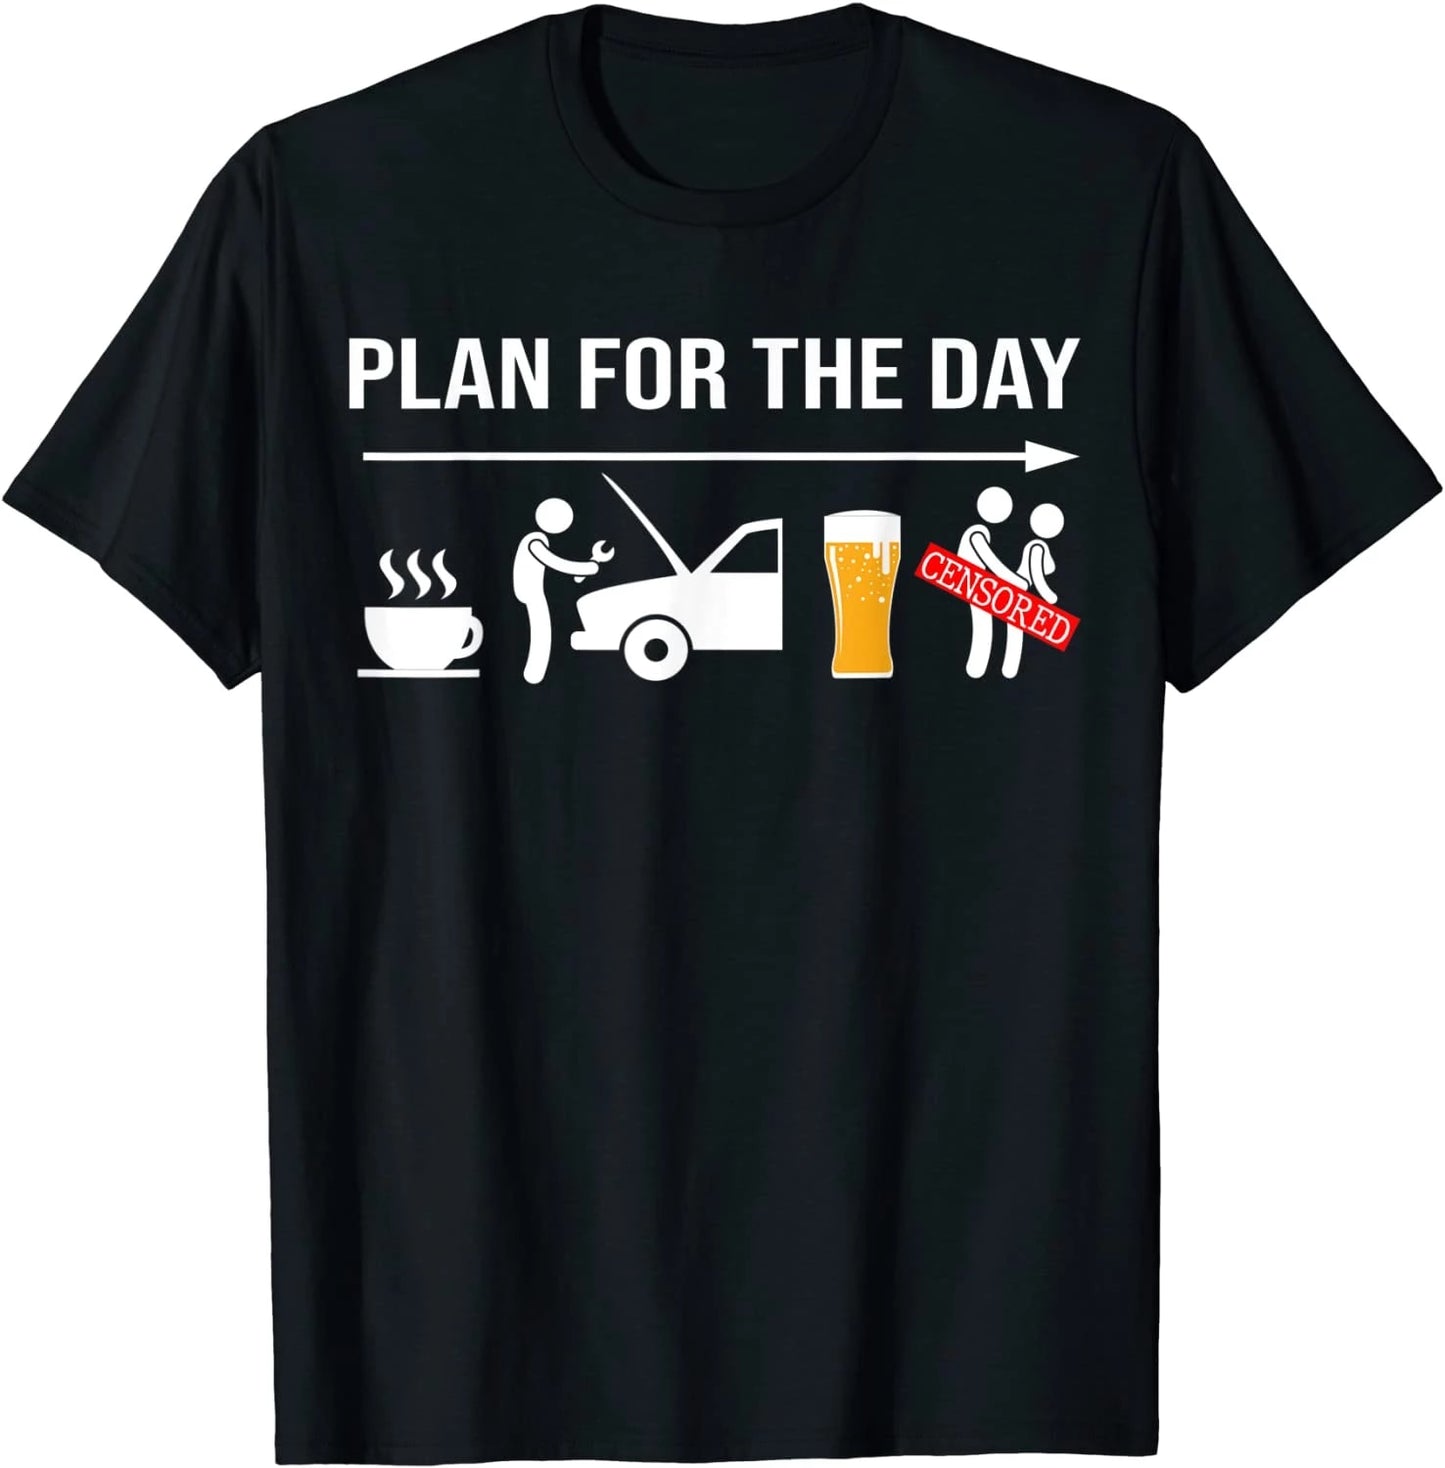 Womens Plan For the Day Funny Meaningful Casual Tops T-Shirts